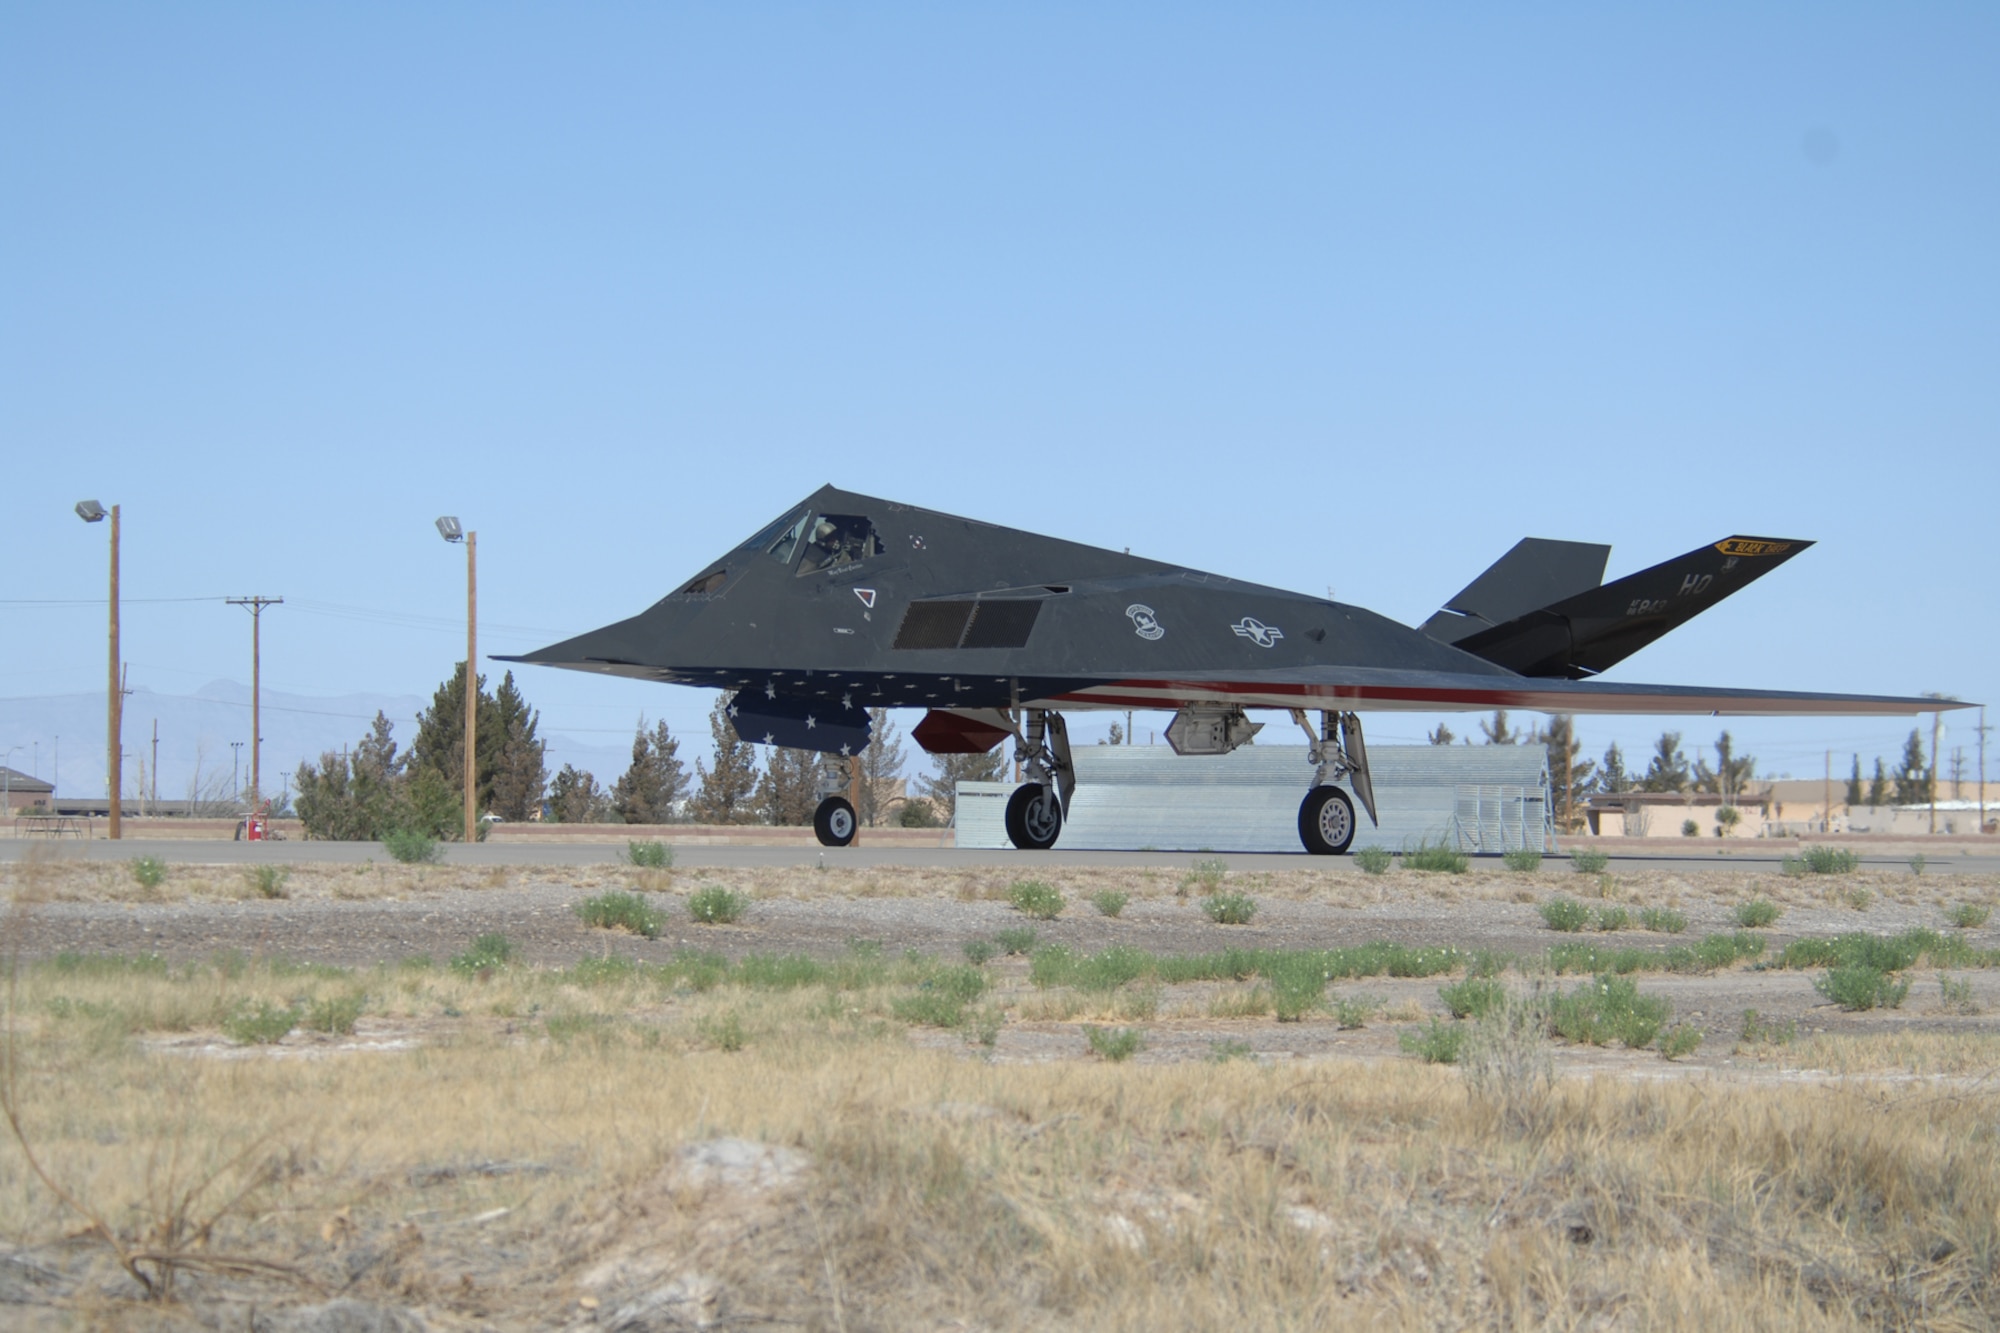 HOLLOMAN AIR FORCE BASE N.M.--An F-117A Nighthawk, tail number 843, taxis to the runway April 21, 2008. Flown by 49th Operations Group Commander Col. Jack Forsythe, the Nighthawk was the lead aircraft in the final F-117A flyby during the Sunset Stealth retirement ceremony here. (U.S. Air Force photo/Airman 1st Class Jamal D. Sutter)